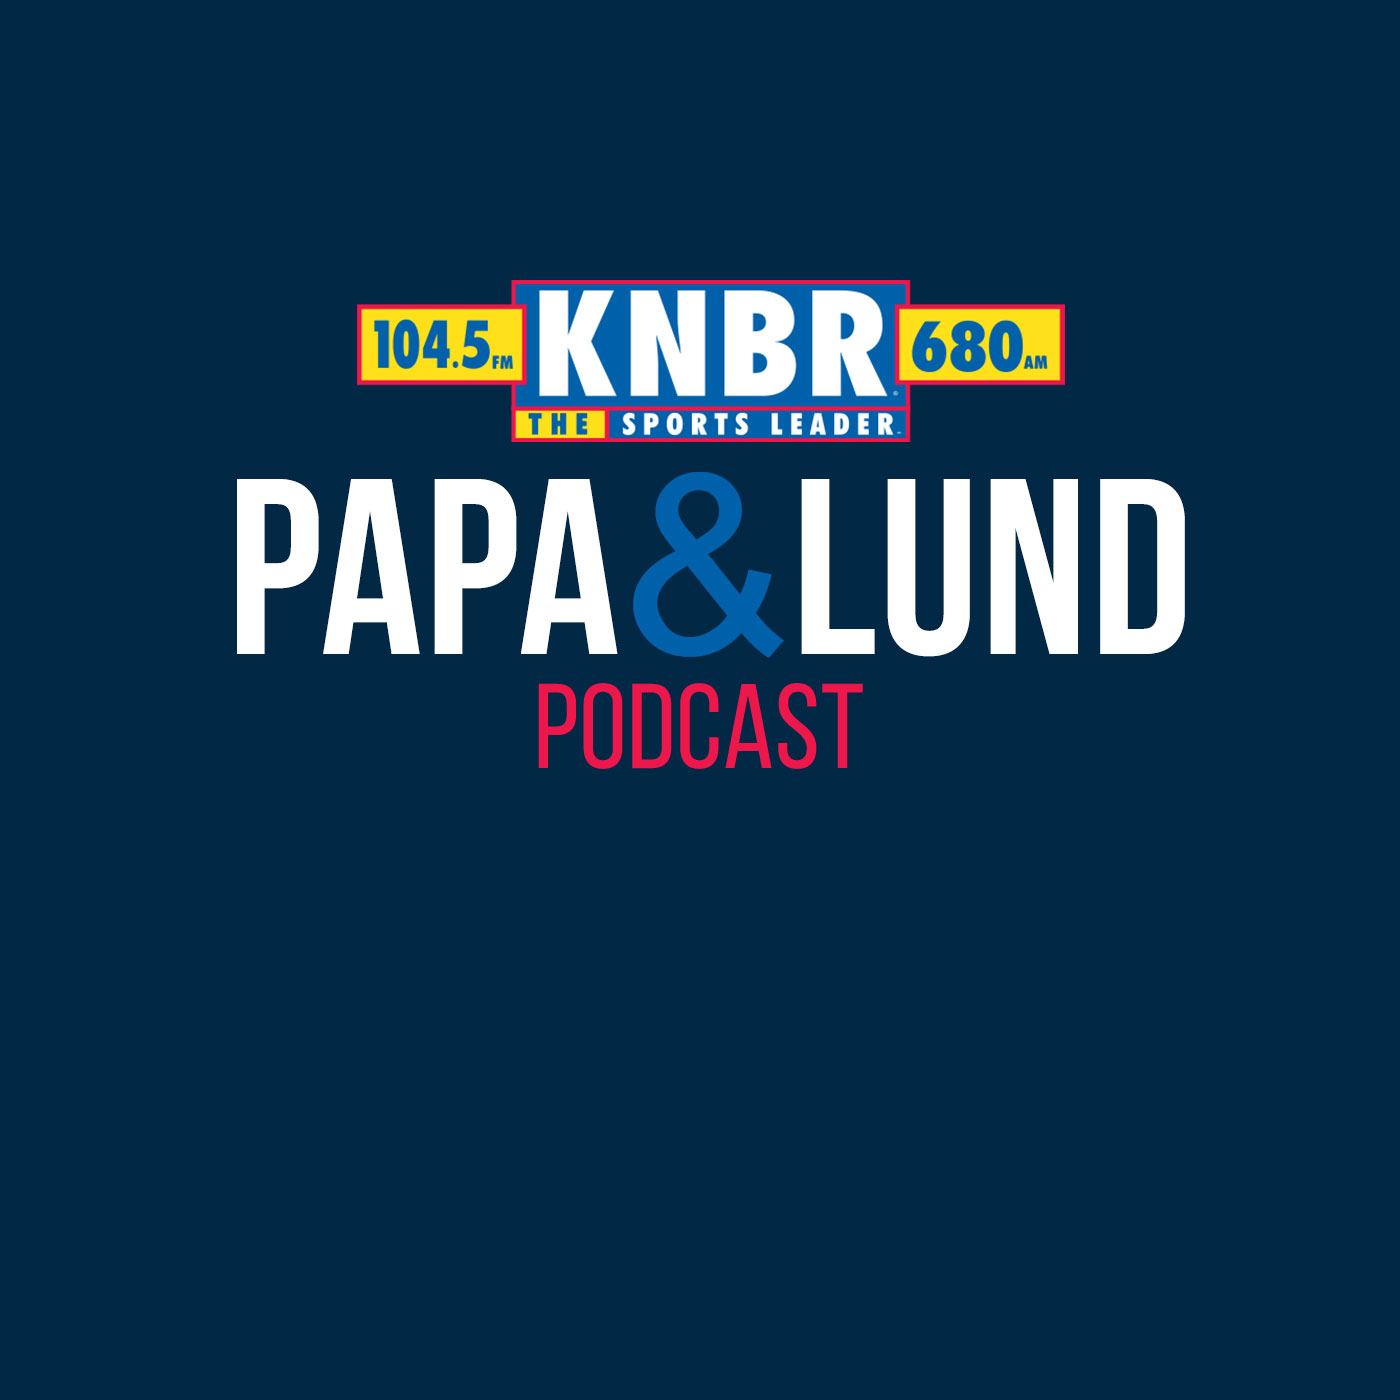 11-22 Donte Whitner joins Papa & Lund to discuss how the 49ers will respond after losing Talanoa Hufanga and what he saw from Ji'Ayir Brown being thrown into the fire and coming up big for the 49ers secondary